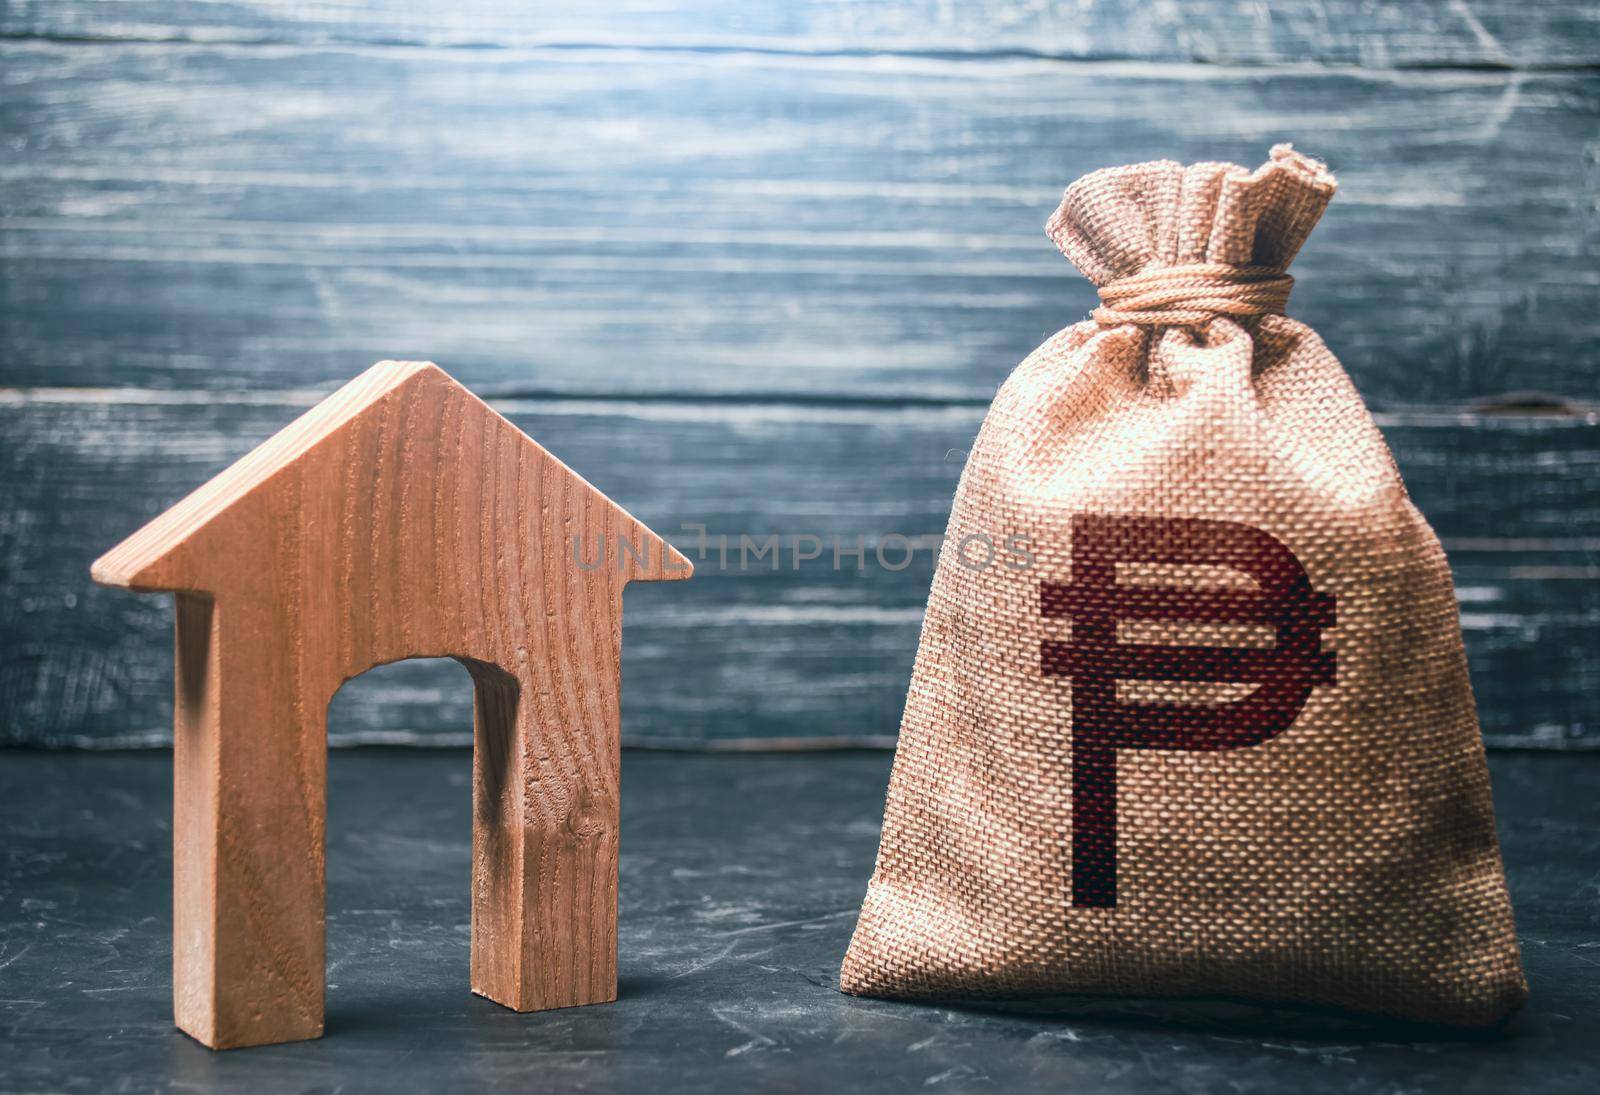 Wooden house and a philippine peso money bag. Mortgage loan. House project development. Rental business. Realtor services. Generating income from rent or sale. Home purchase, investment in real estate by iLixe48